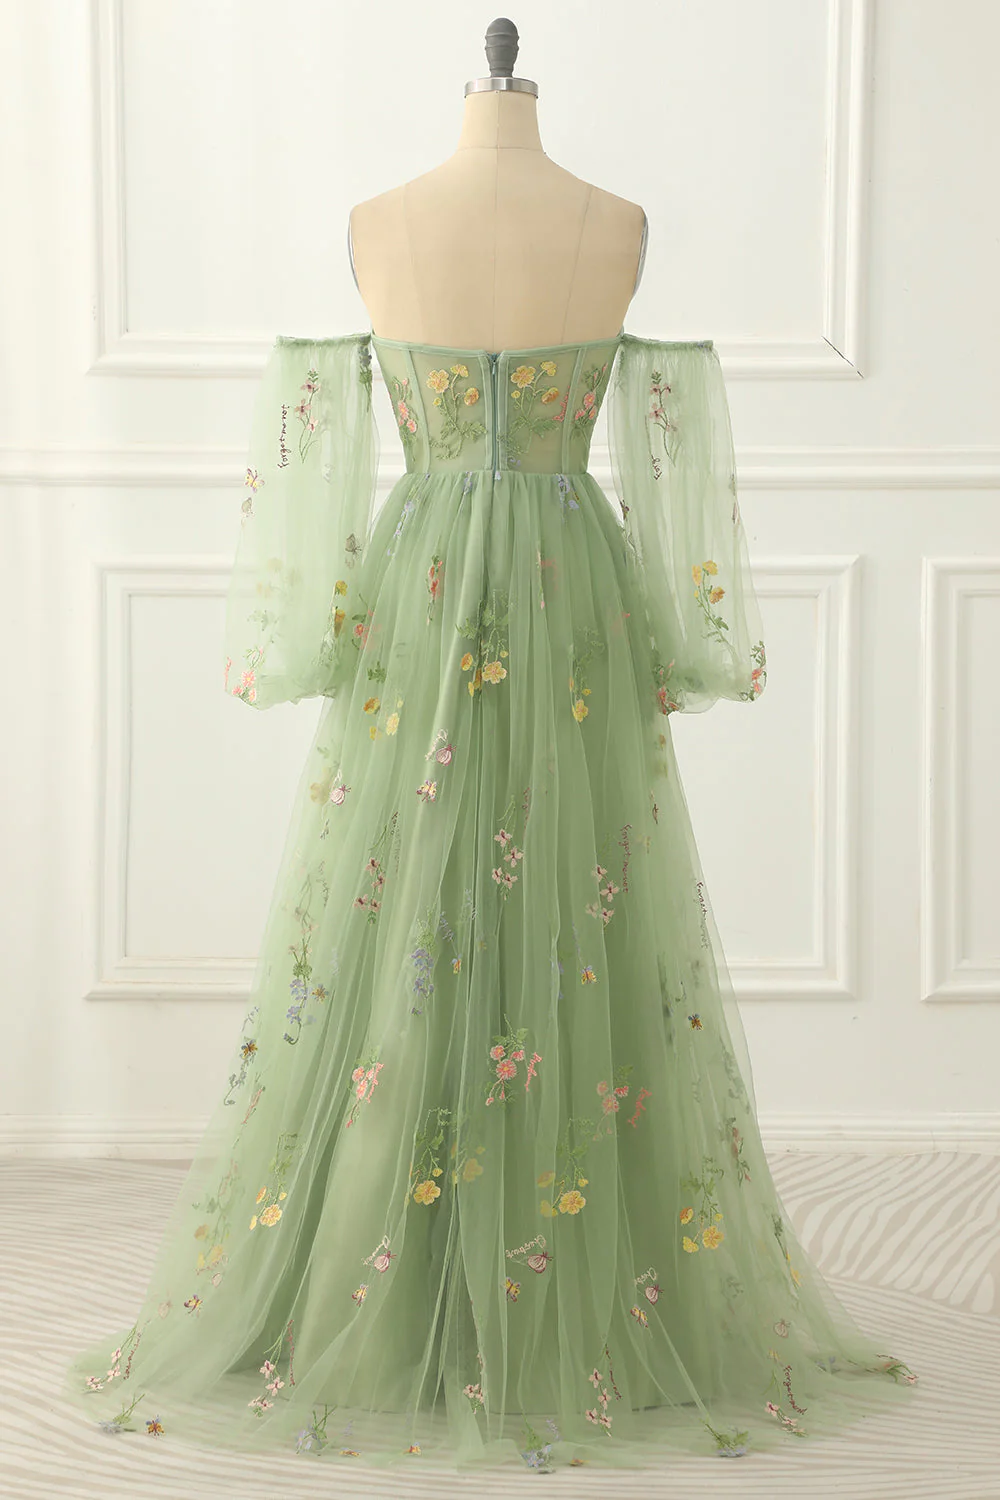 Green Tulle Off the Shoulder A-line Prom Dress with Floral Embroidery Y6790